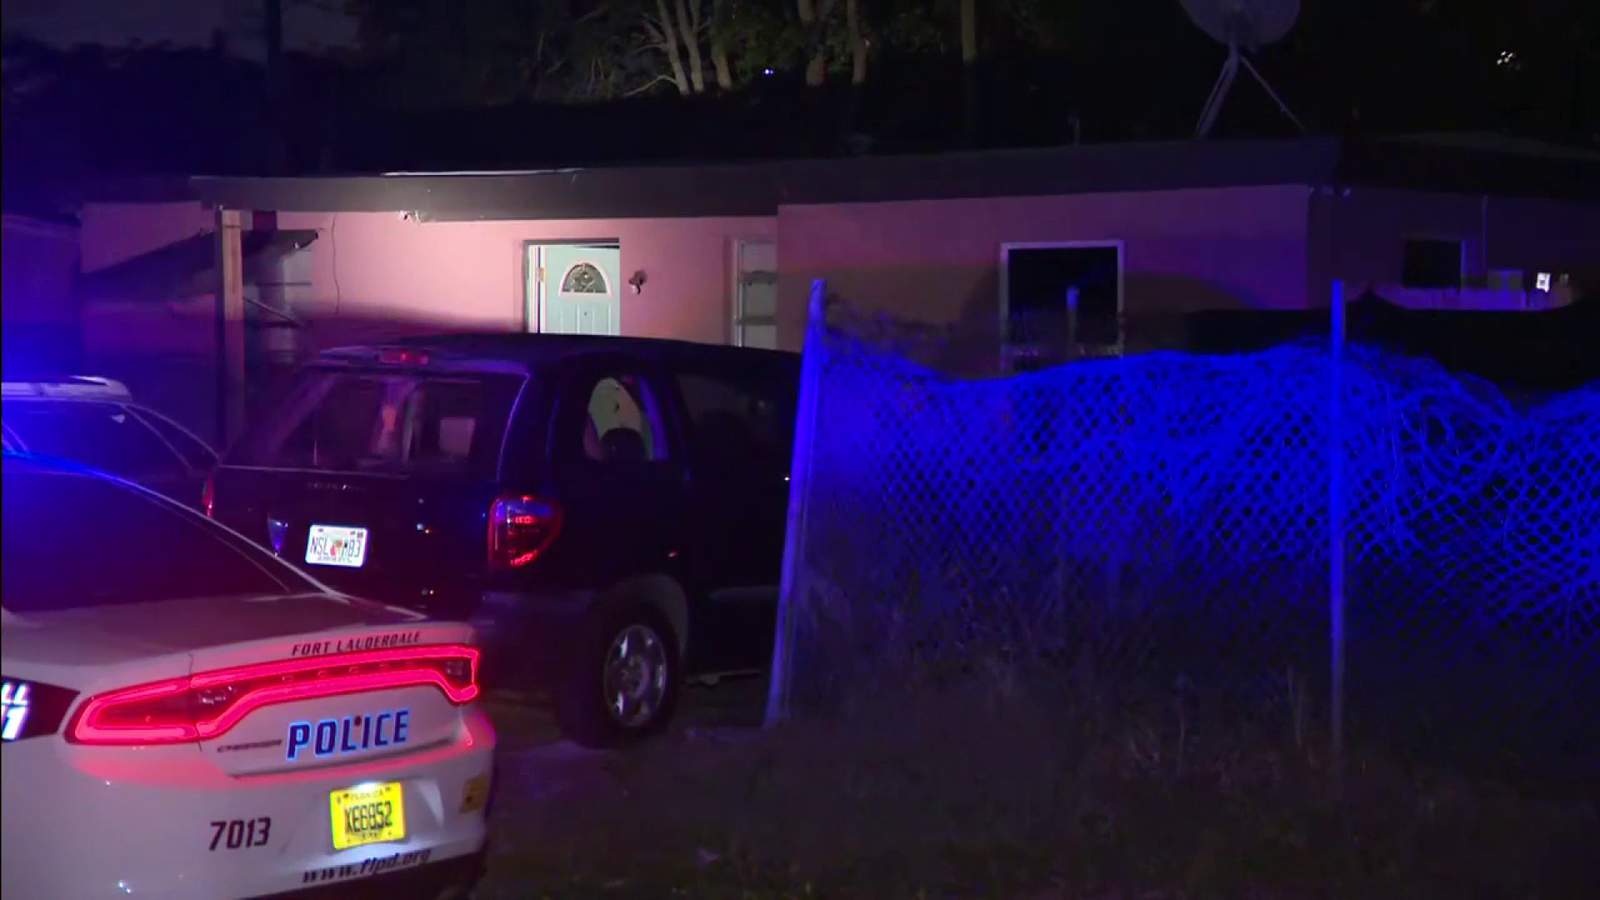 SWAT called to Fort Lauderdale home over dispute about DJ equipment